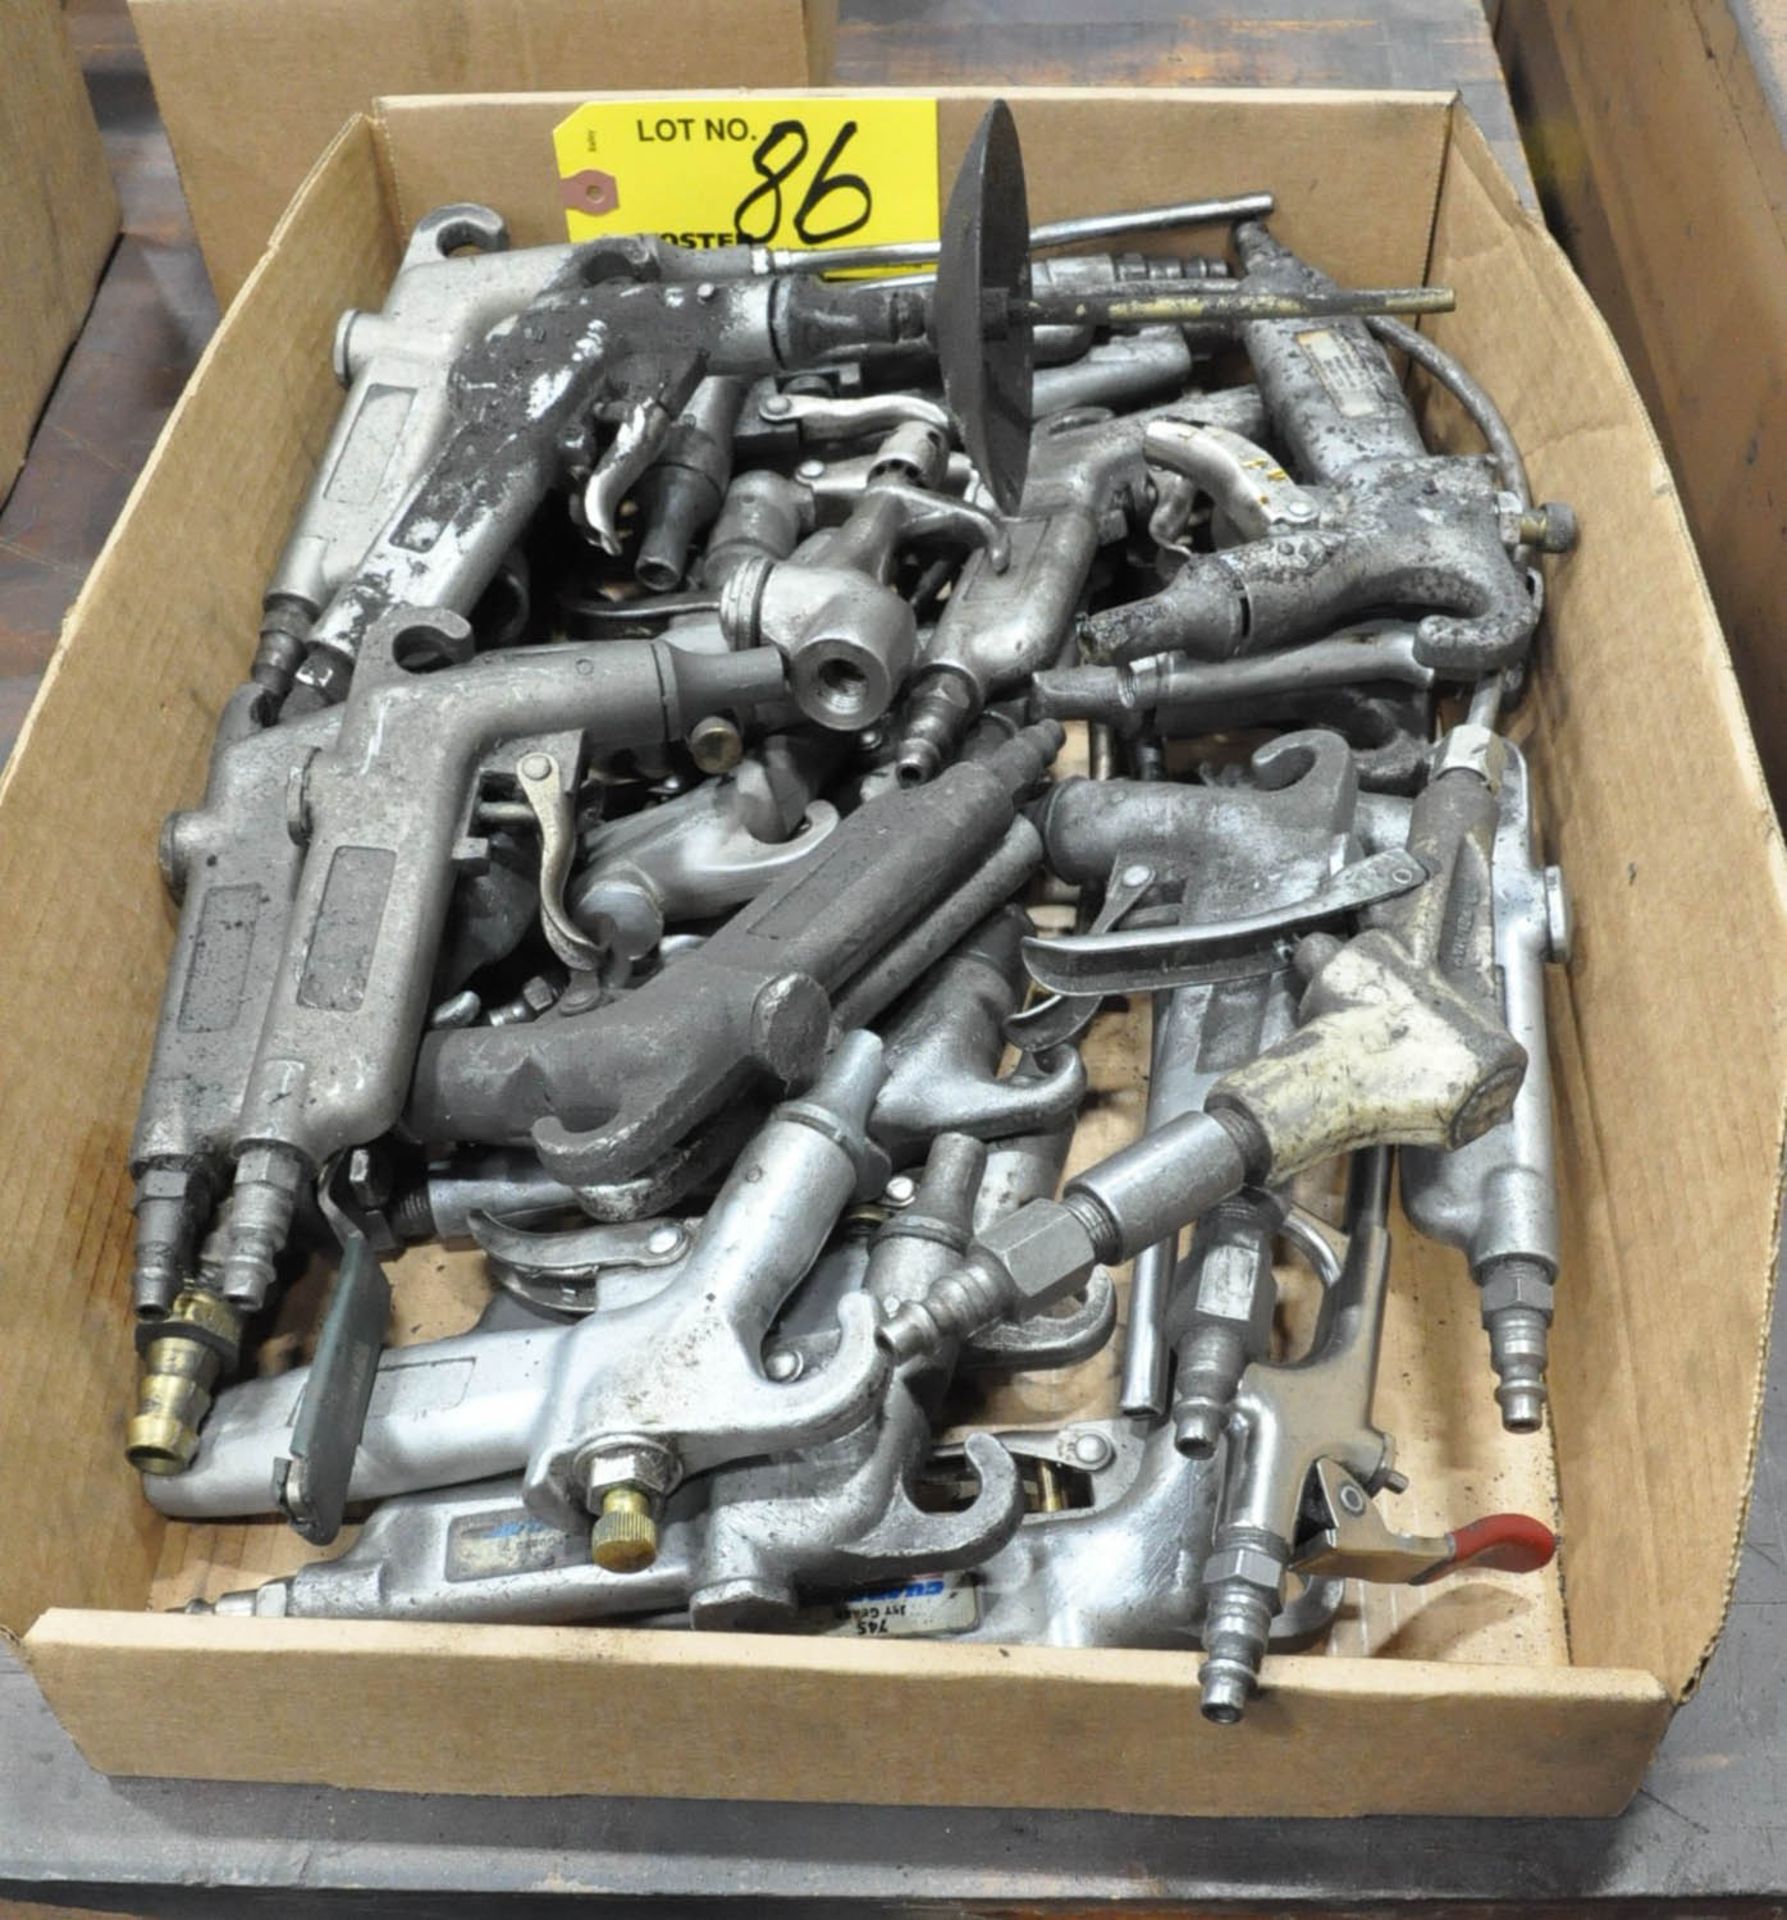 PNEUMATIC BLOW-OFF TOOLS IN (1) BOX, (TOOL ROOM-TIFFIN)